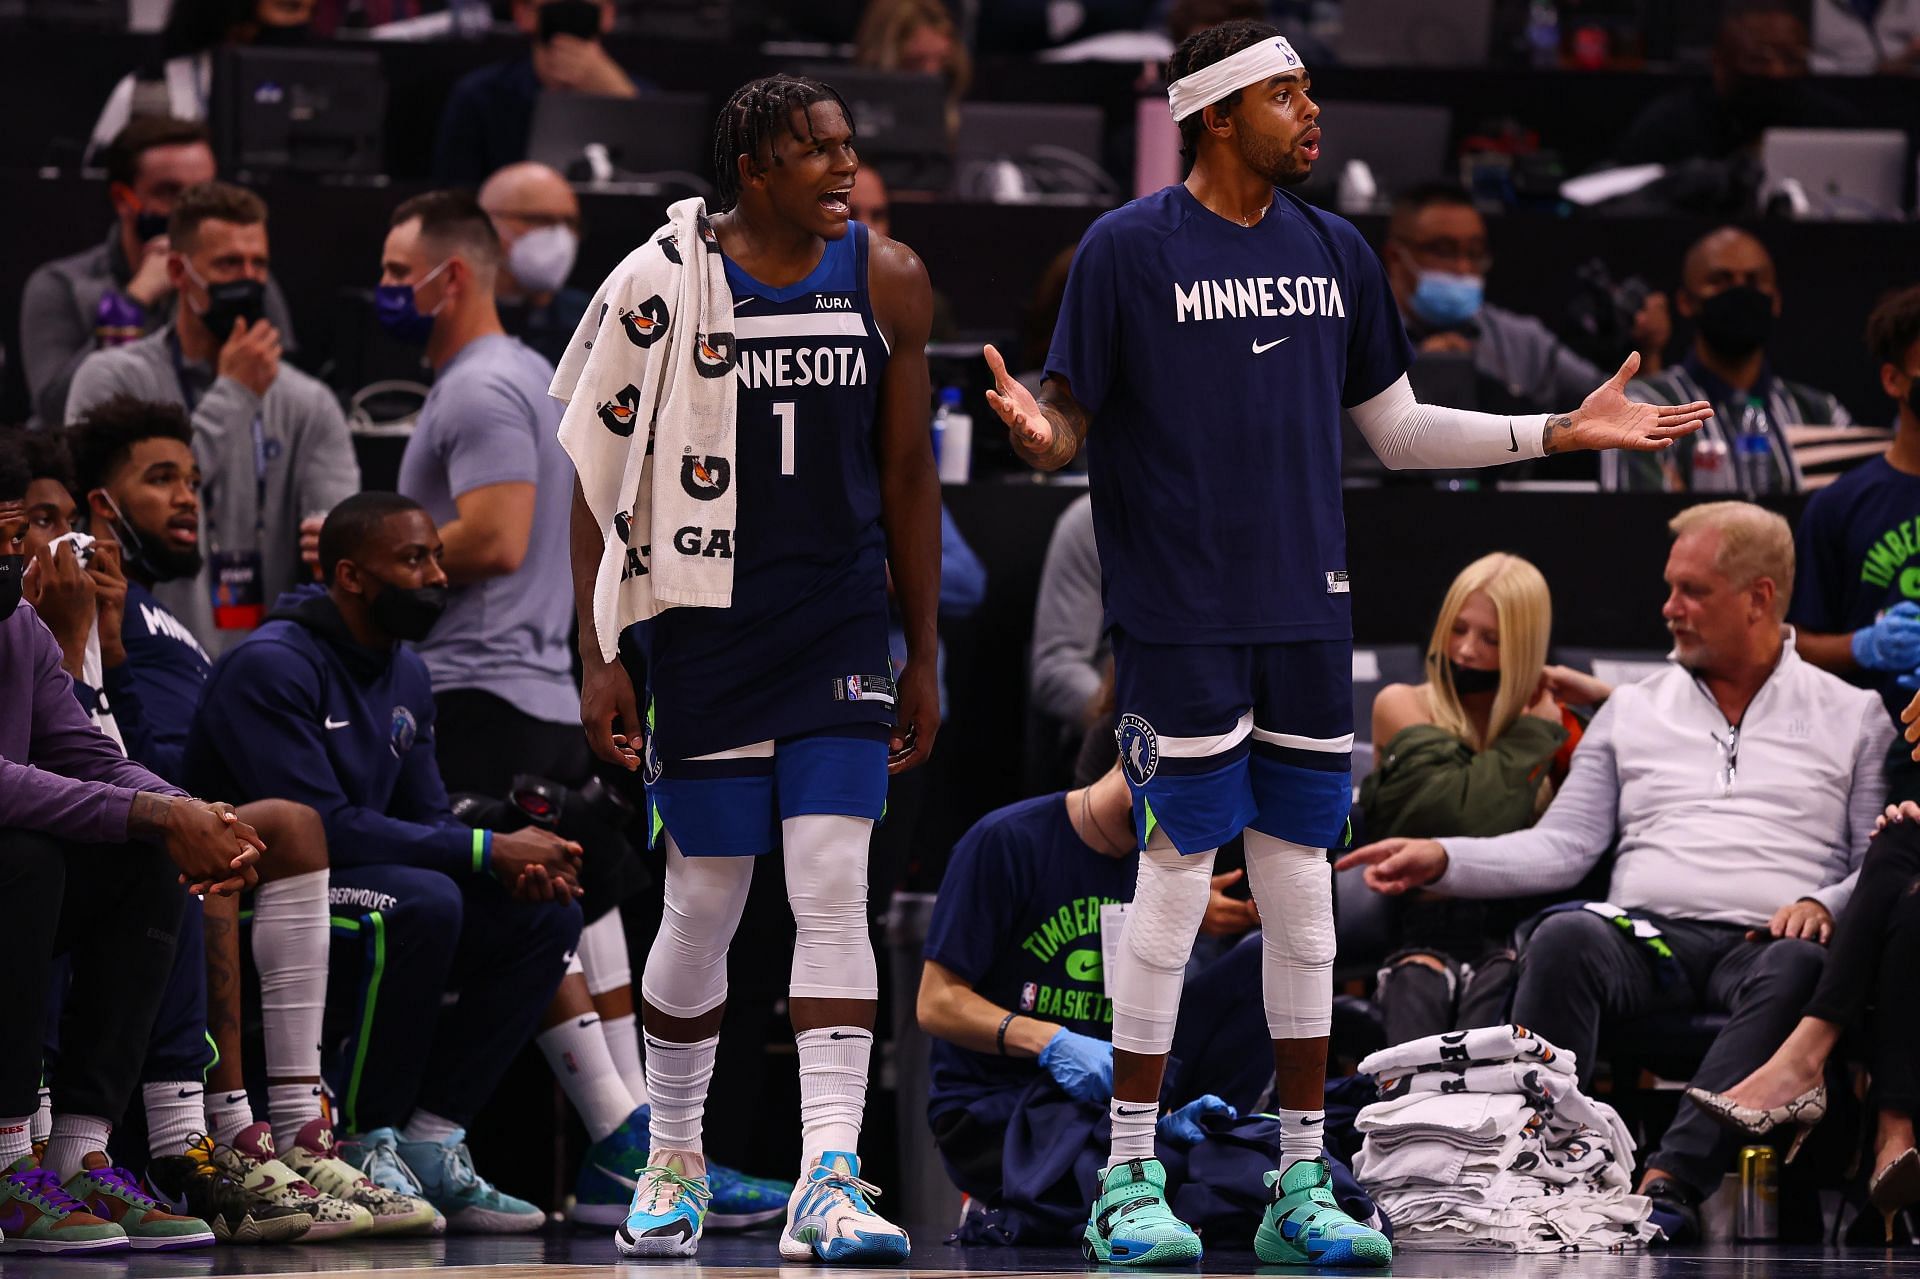 The Minnesota Timberwolves&#039; bench reacts to a call